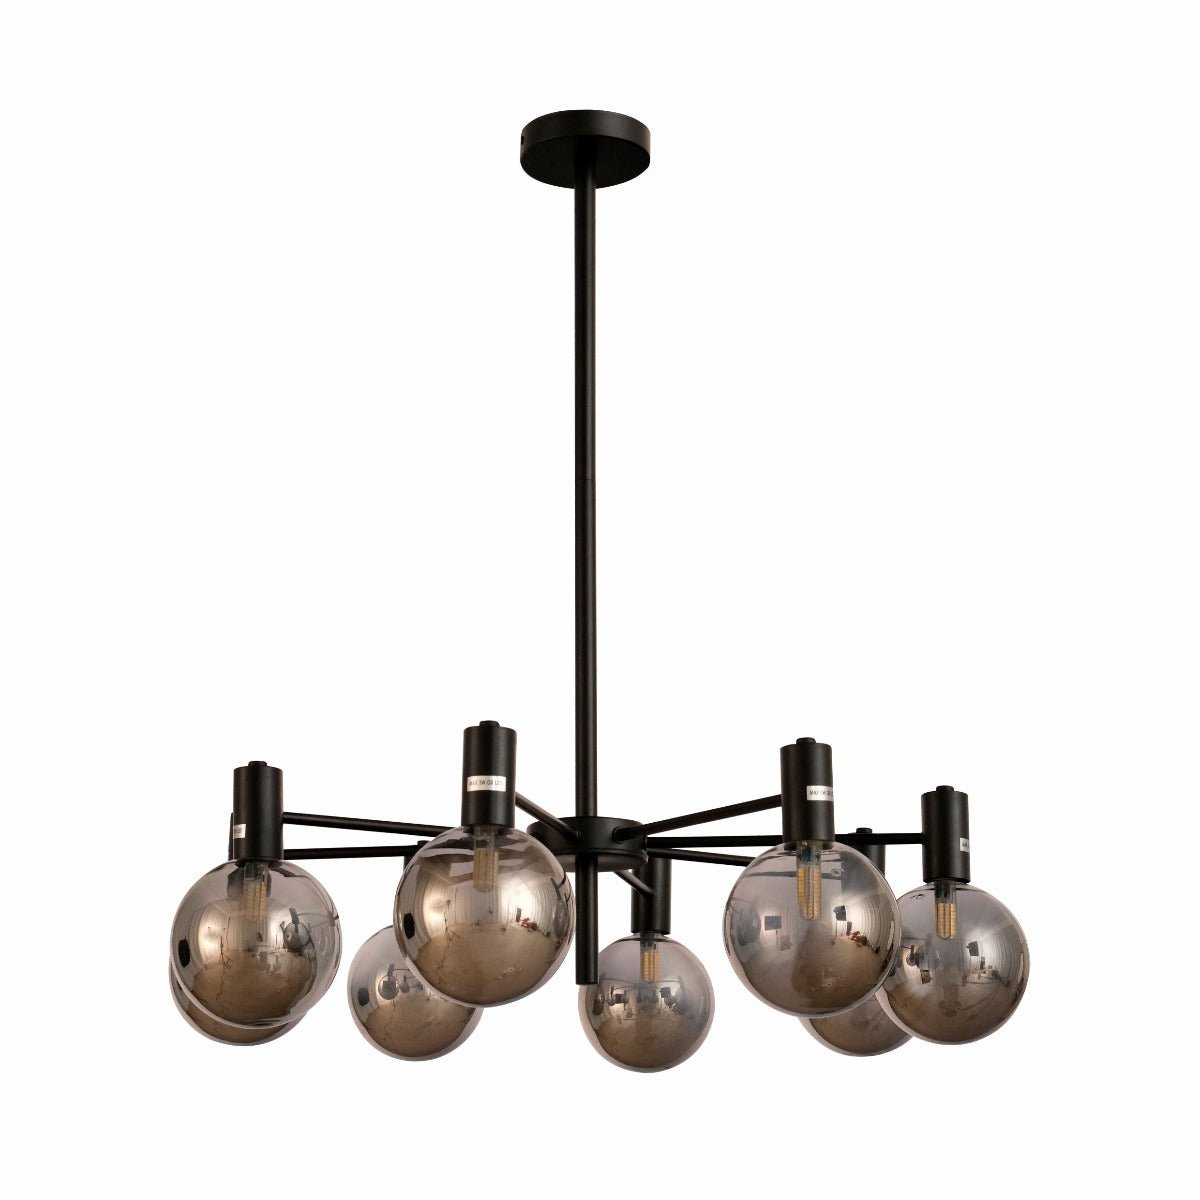 Main image of Black and Smoky Chandelier with 8xG9 Fitting | TEKLED 158-19620